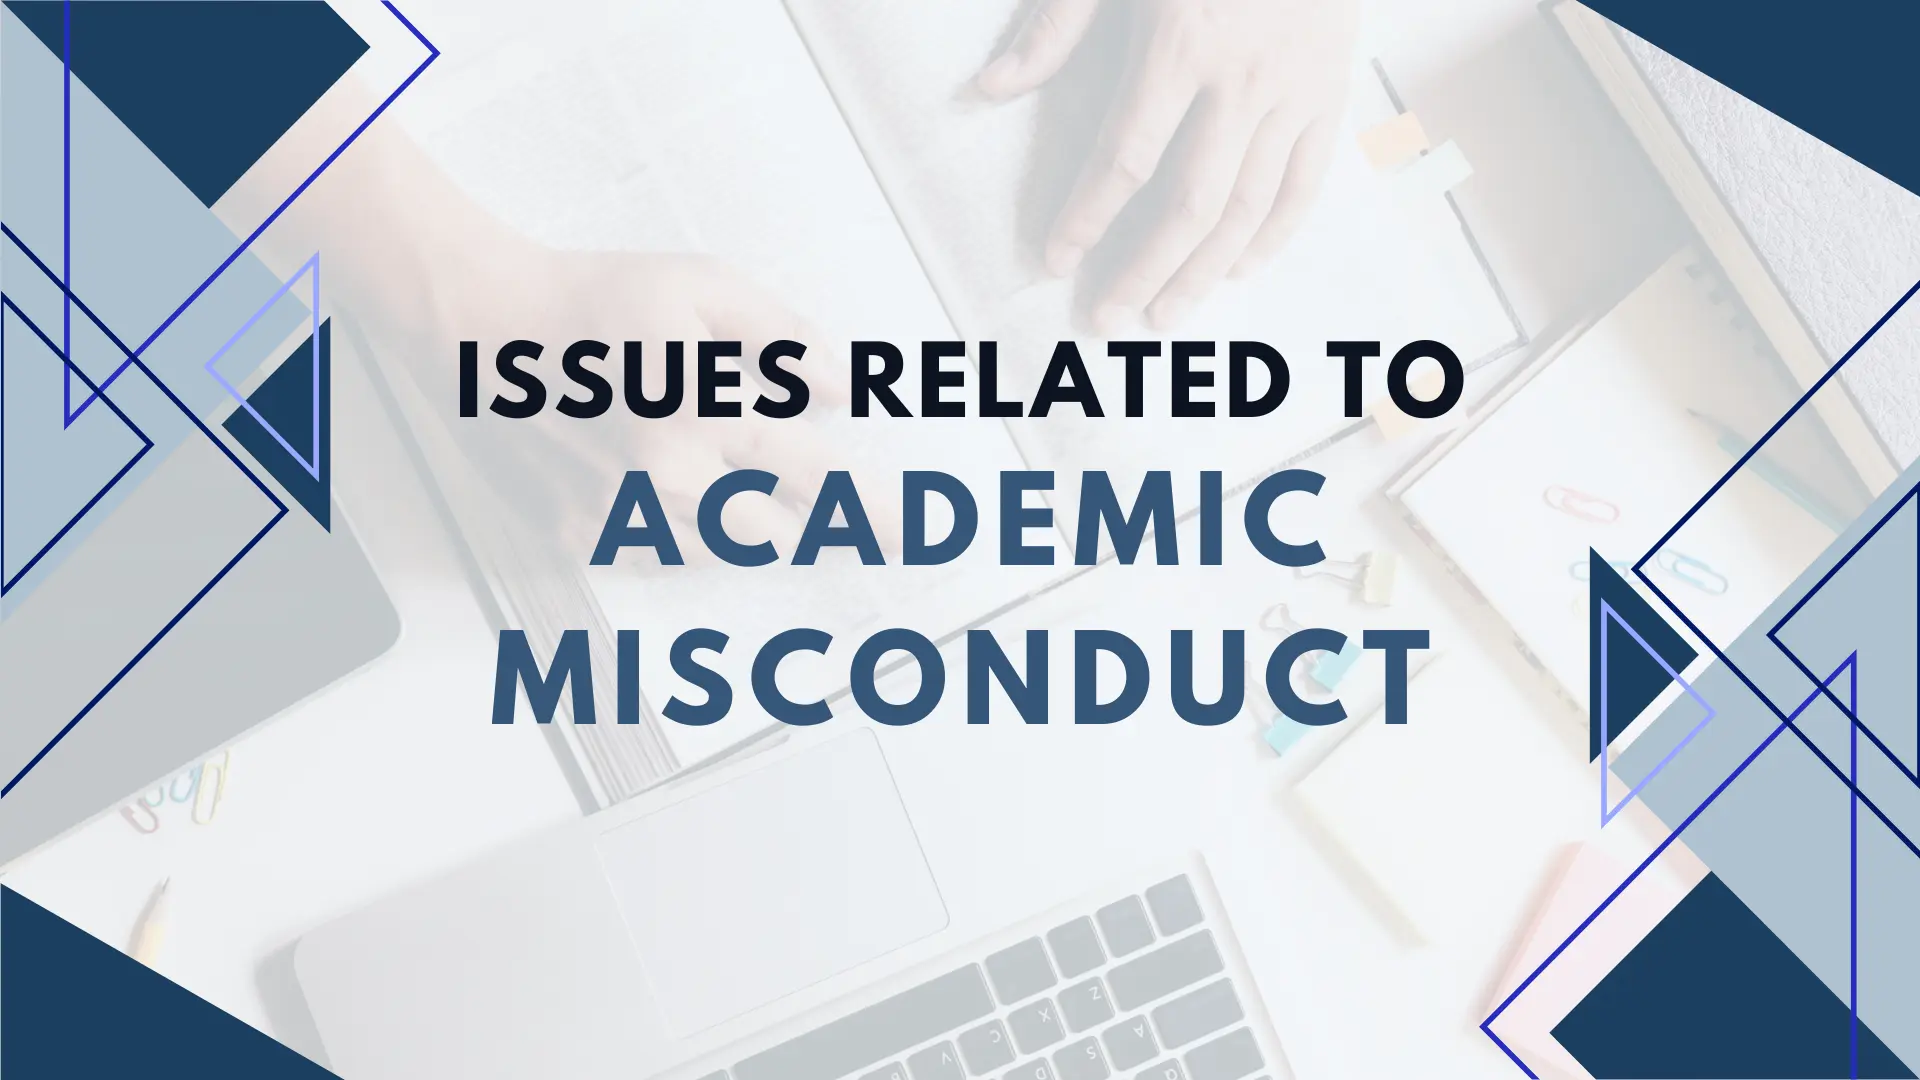 Issues related to academic misconduct